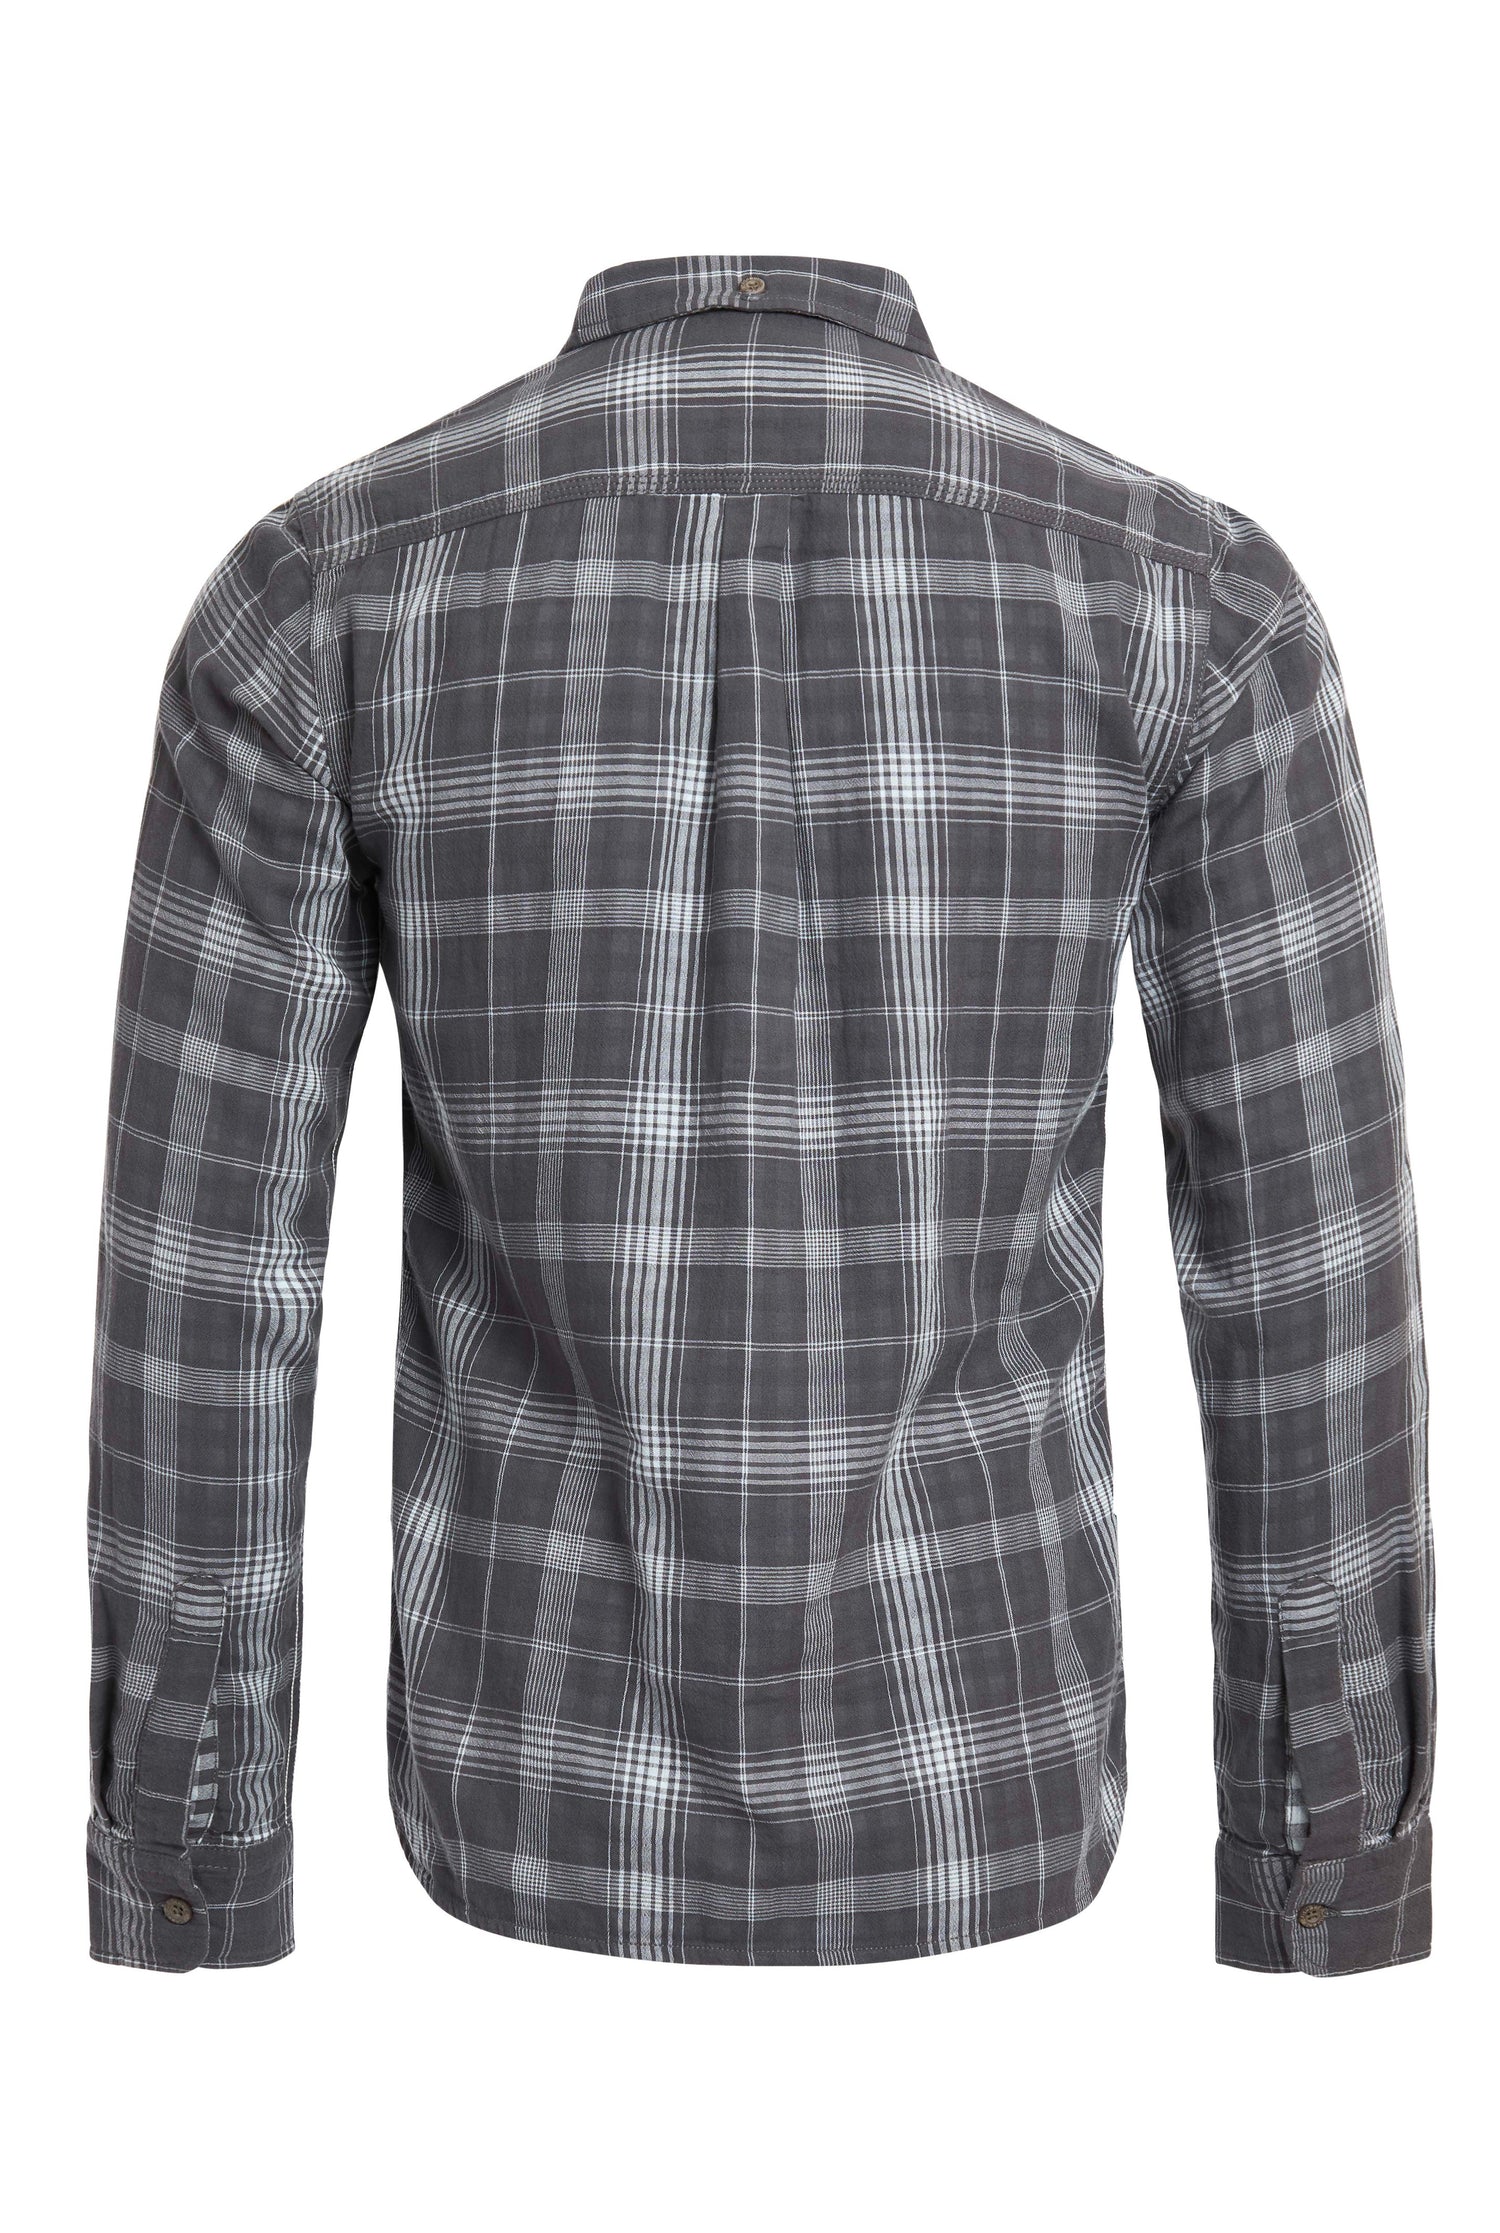 Lindale Long Sleeve Check Shirt - Cement